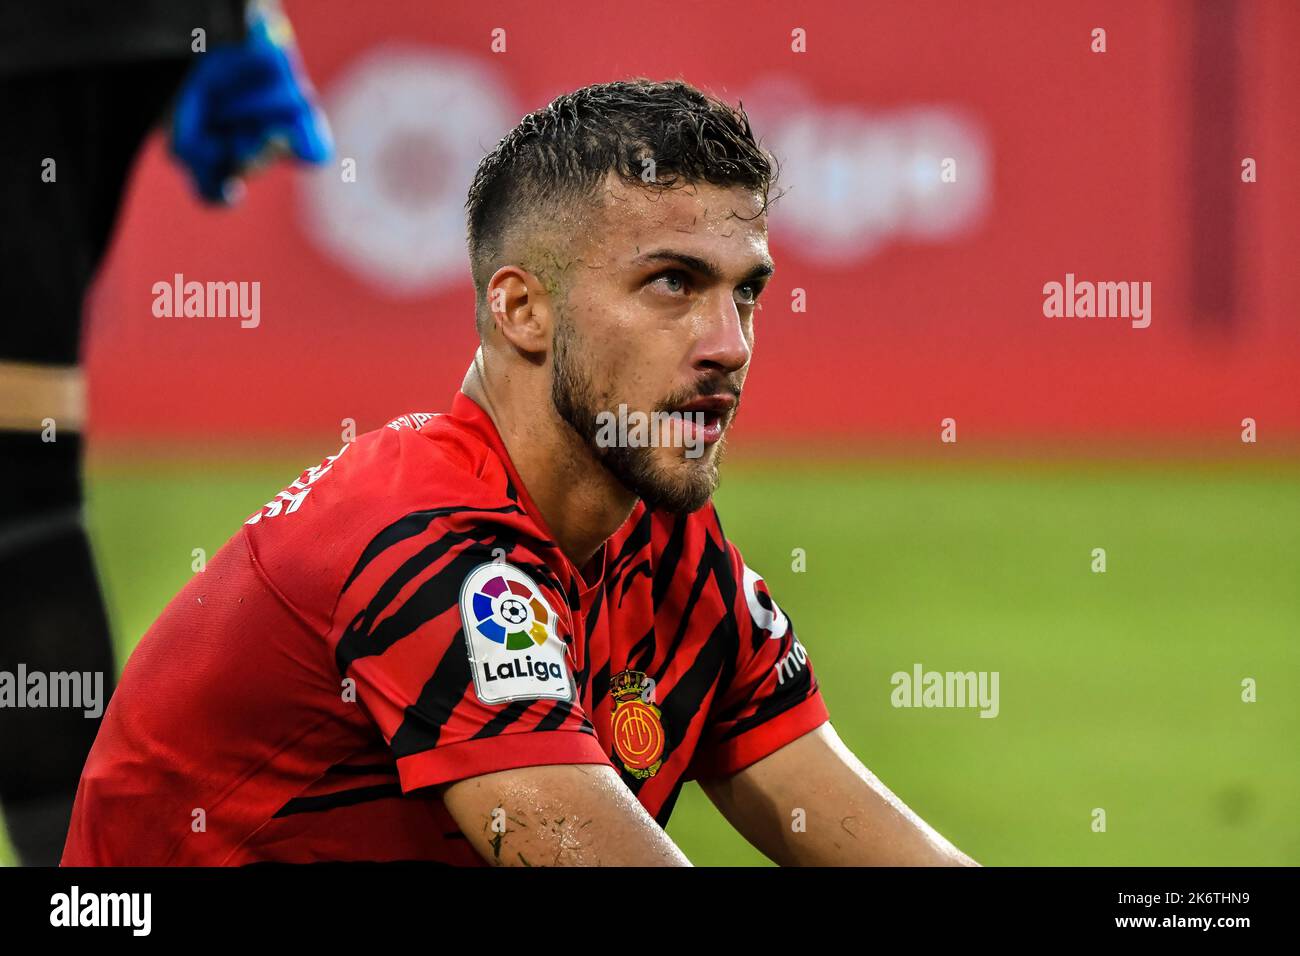 MALLORCA, SPAIN - OCTOBER 15: Jose Copete of RCD Mallorca during the match between RCD Mallorca and Sevilla CF of La Liga Santander on October 15, 2022 at Son Moix Stadium of Mallorca, Spain. (Photo by Samuel Carreño/PxImages) Credit: Px Images/Alamy Live News Stock Photo